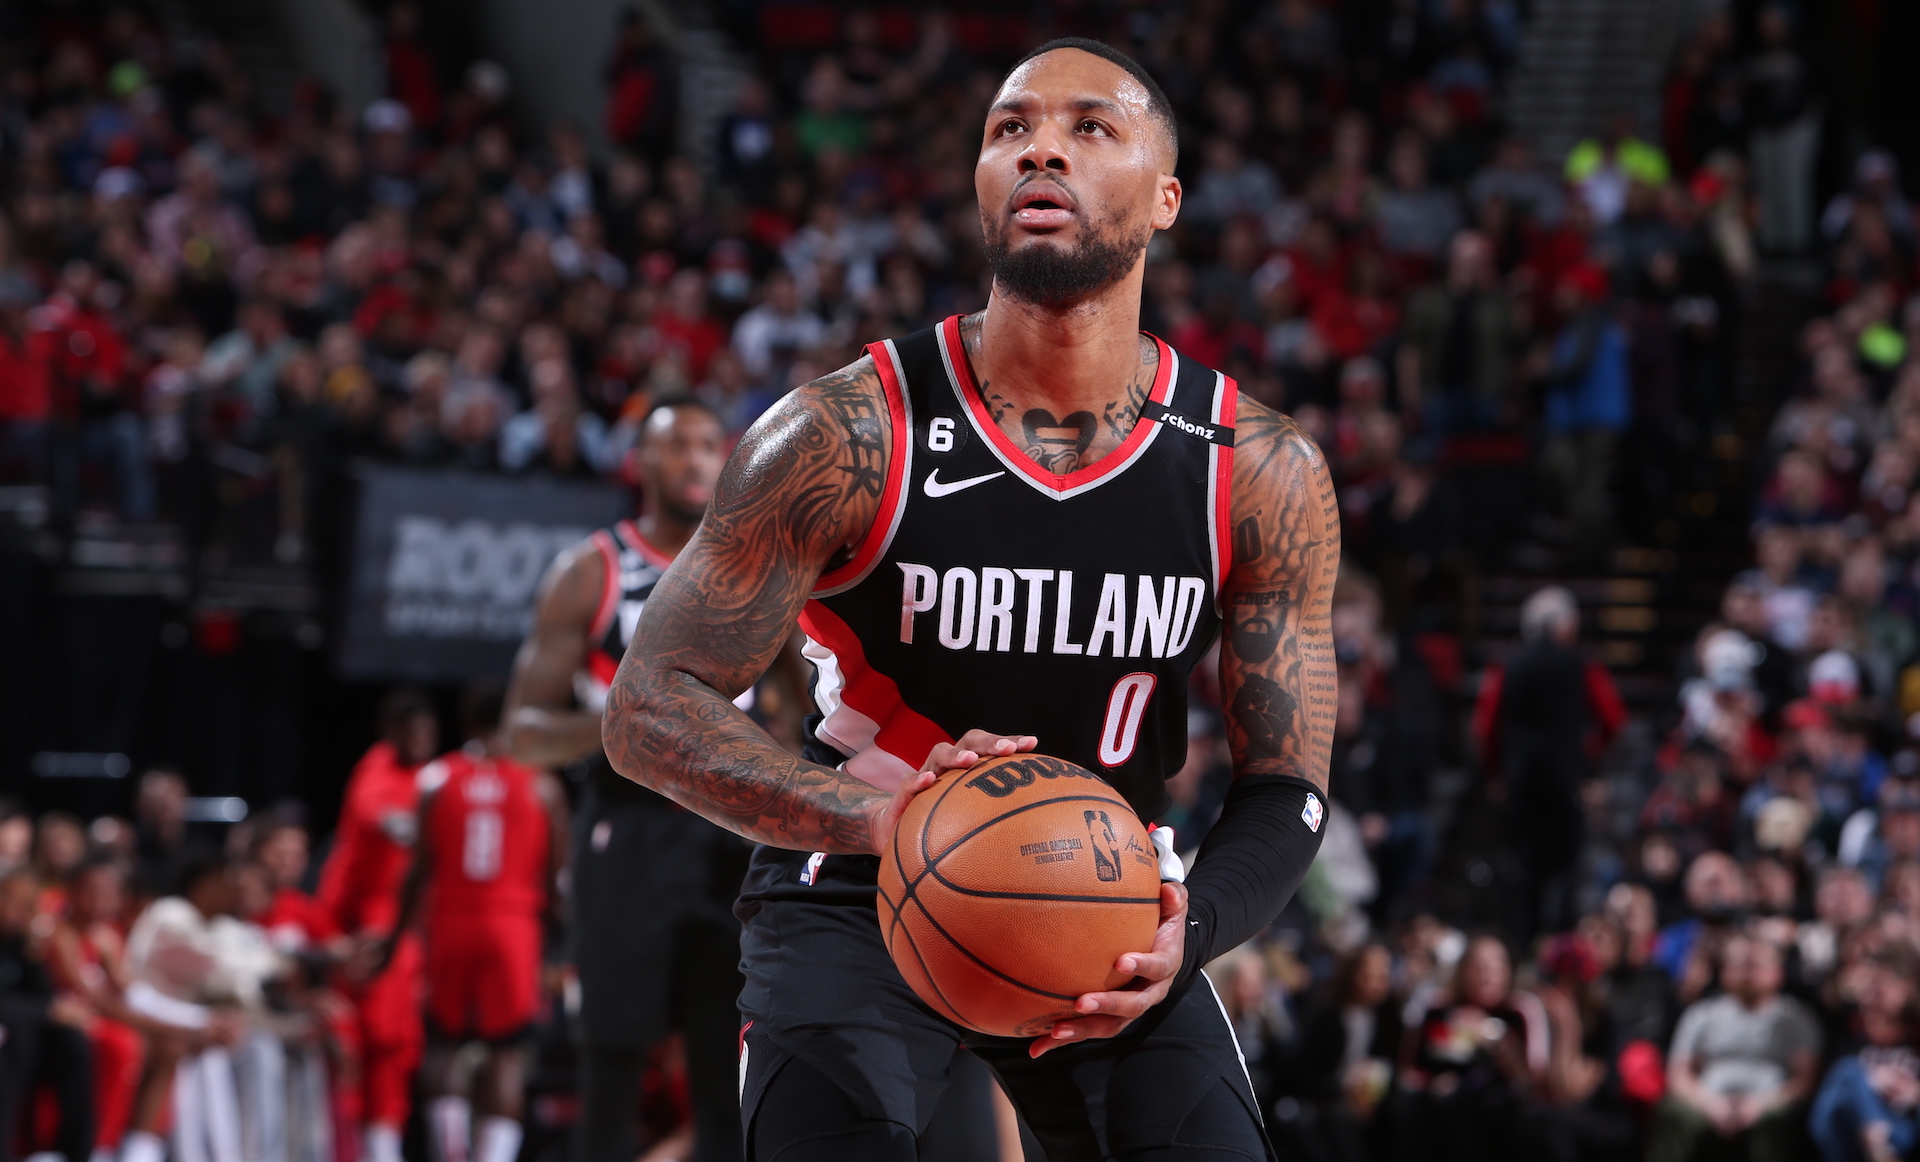 NBA basketball player Damian Lillard leaves a special message for